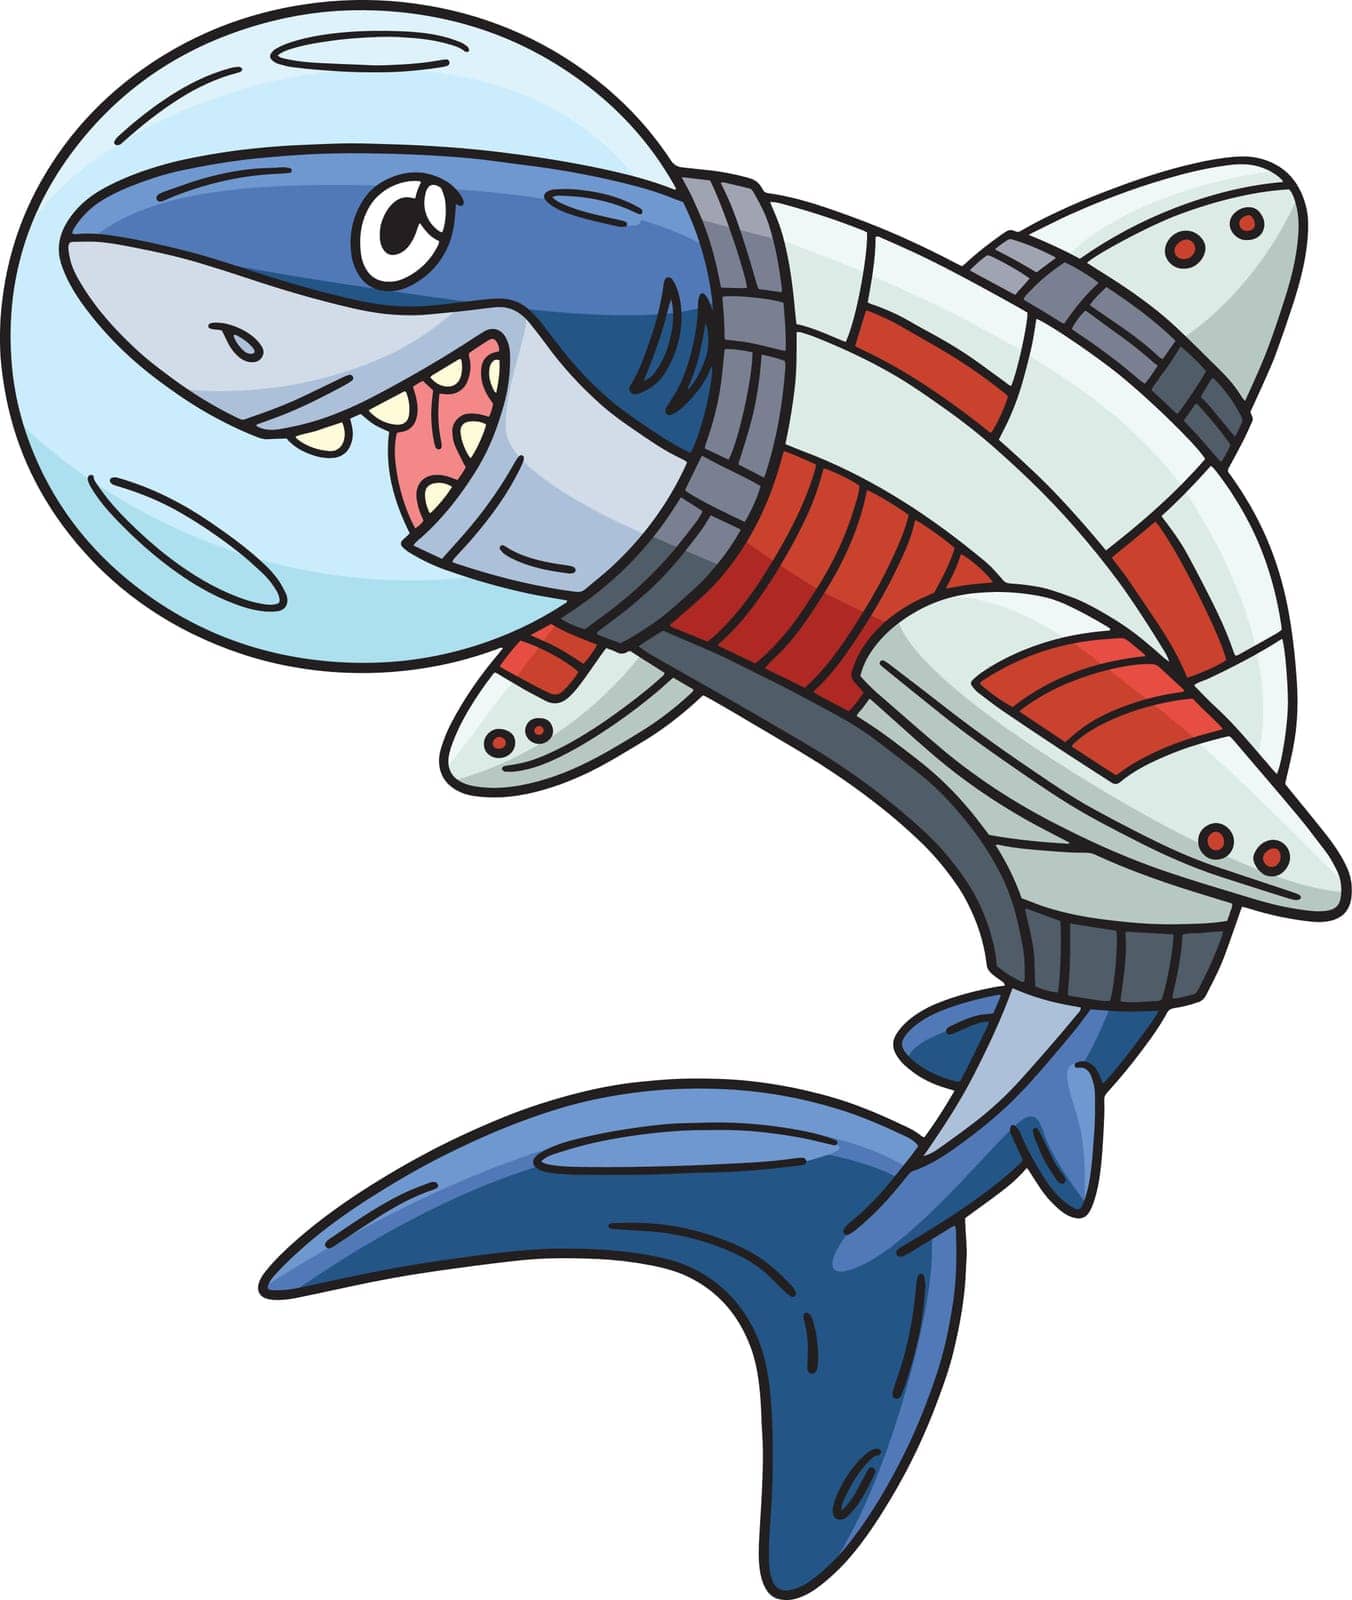 This cartoon clipart shows a Space Shark illustration.